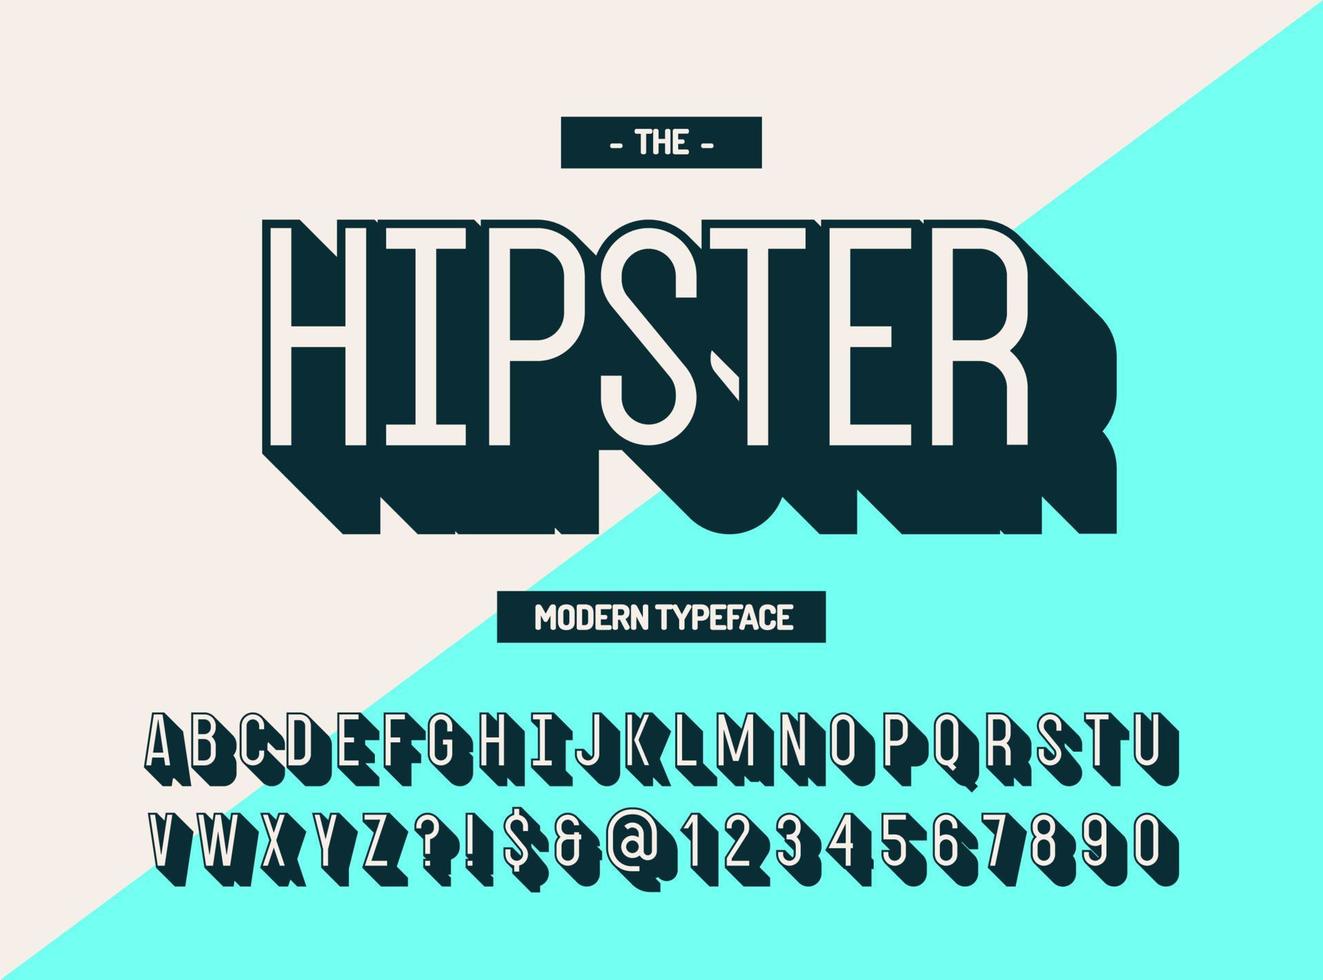 Hipster modern typeface 3d style. Cool font vector